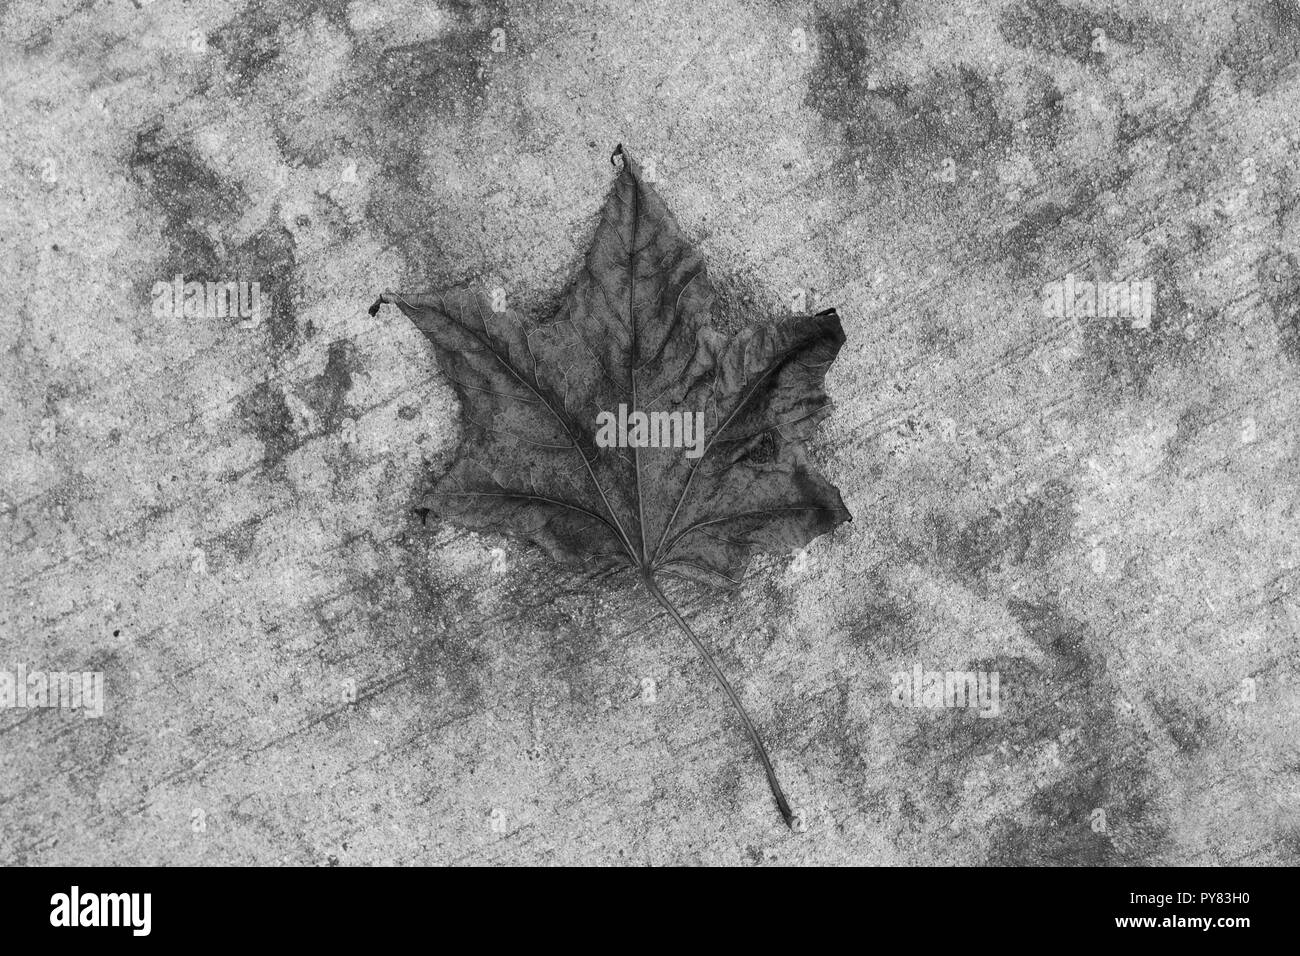 In the fall, a maple leaf on the ground. Gray scale. Stock Photo